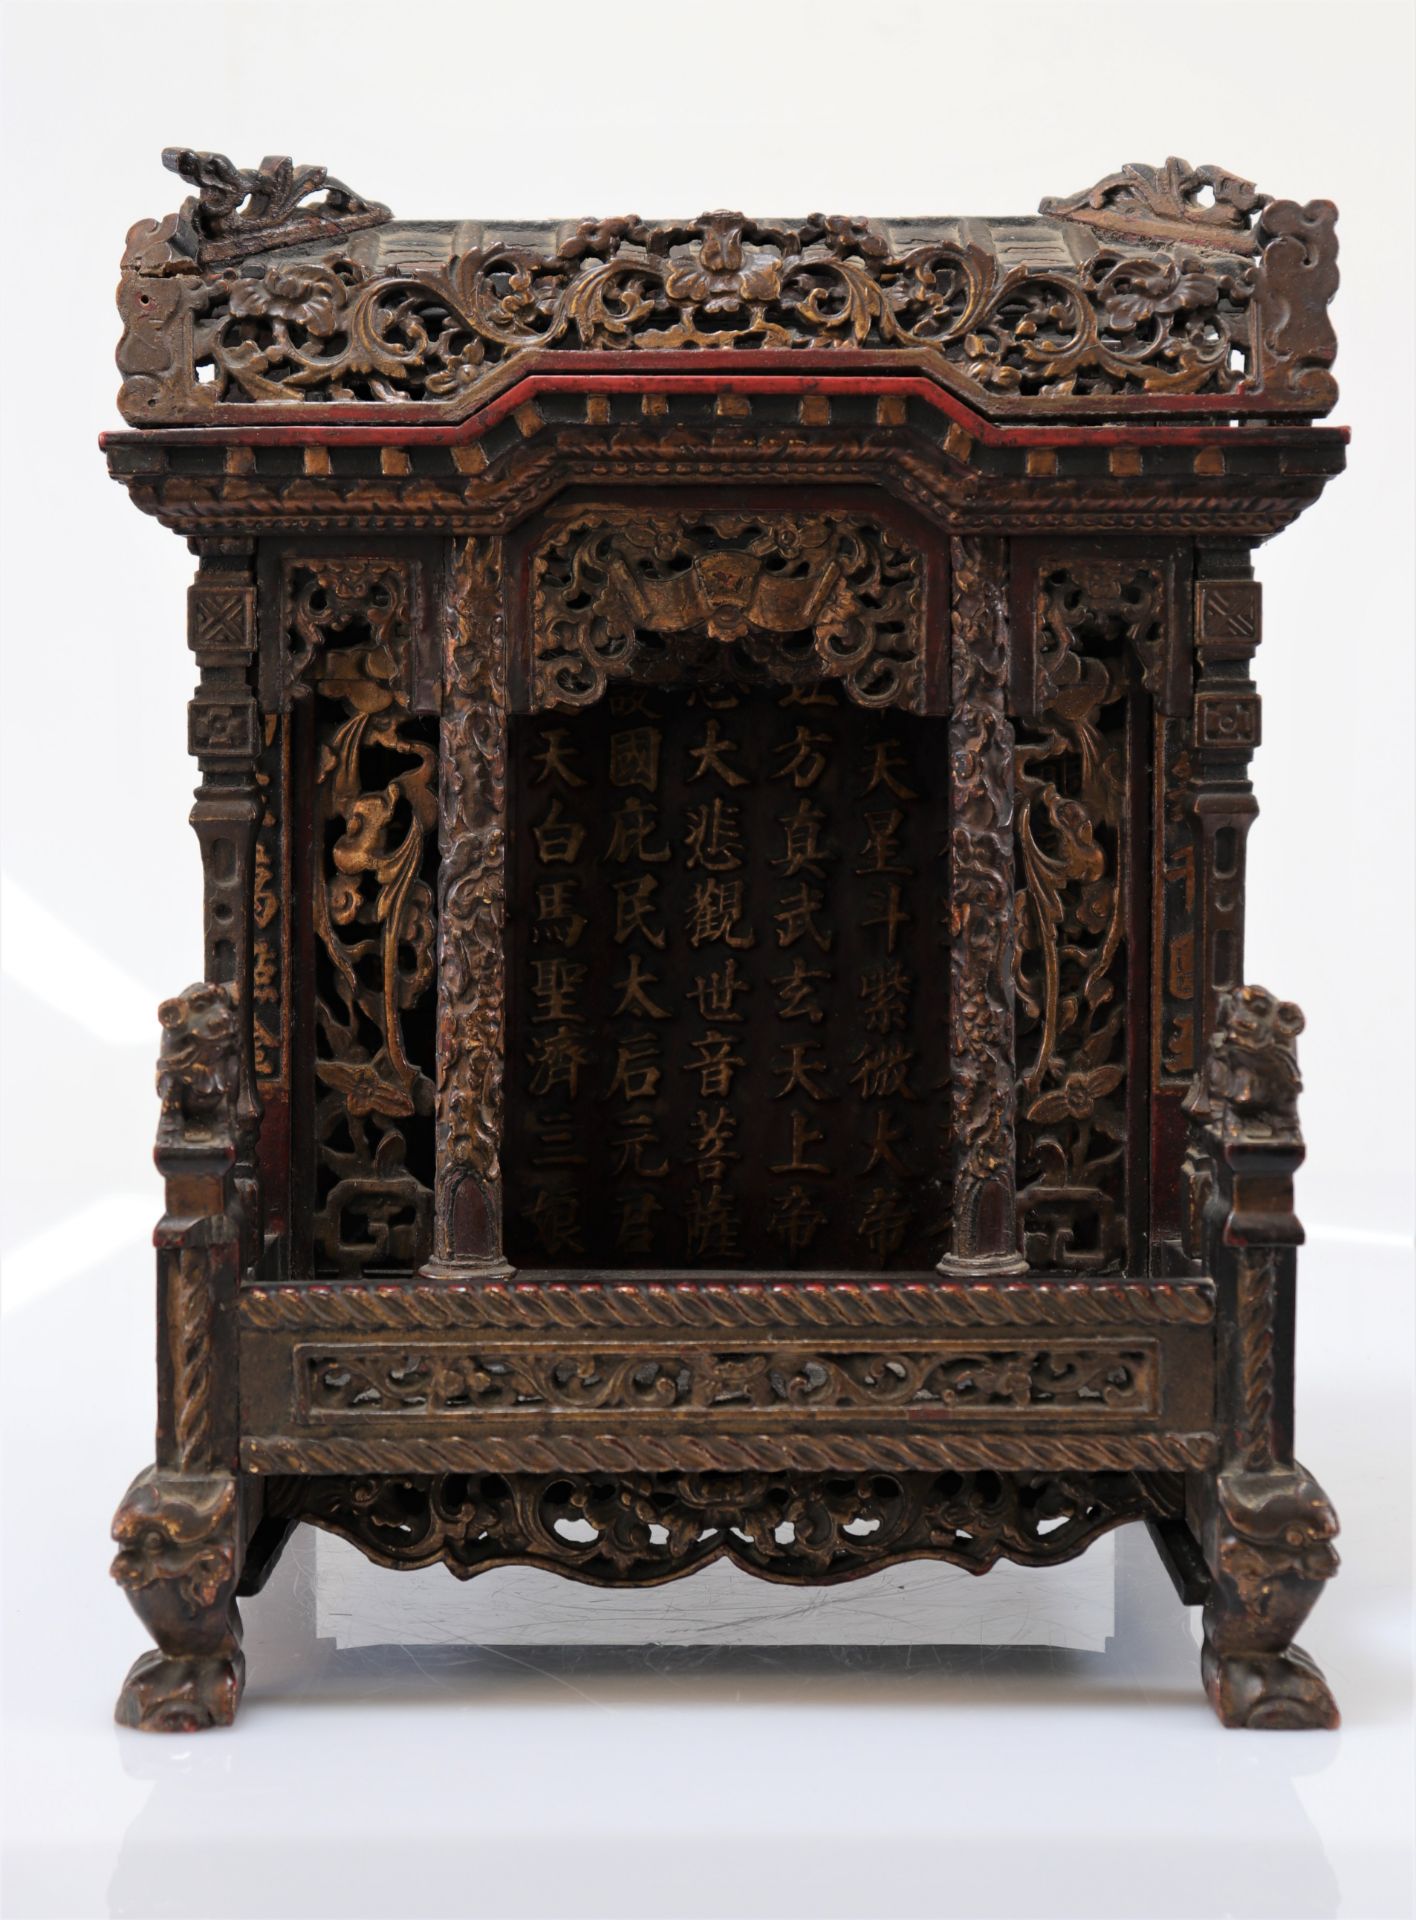 Carved wooden hotel china with various calligraphy